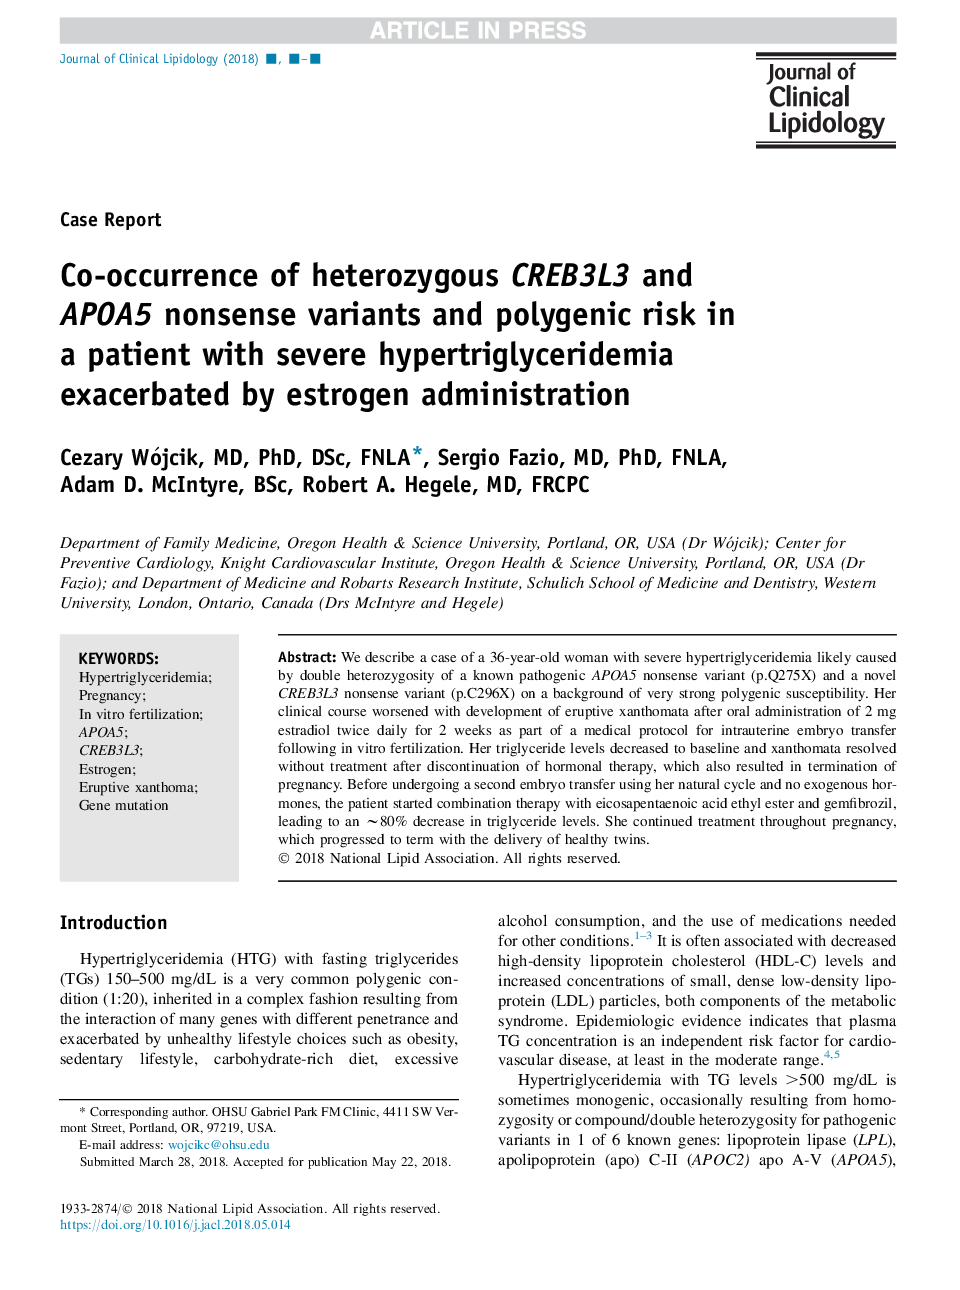 Co-occurrence of heterozygous CREB3L3 and APOA5 nonsense variants and polygenic risk in a patient with severe hypertriglyceridemia exacerbated by estrogen administration